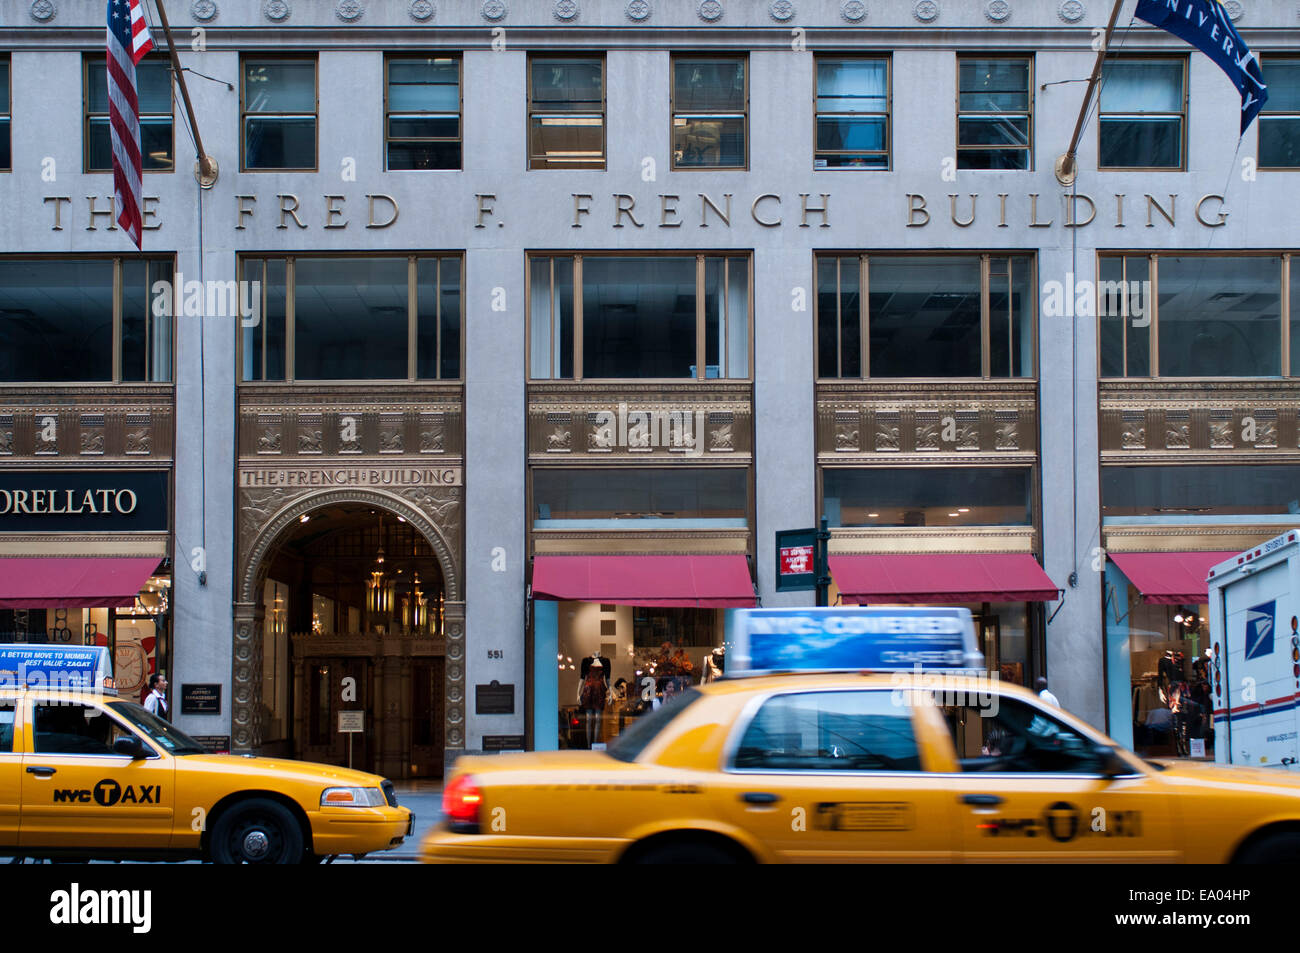 Taxis (cabs) in front of The Fred F. French Building, Fifth Avenue, New York City, United States of America. The Fred F. French Stock Photo